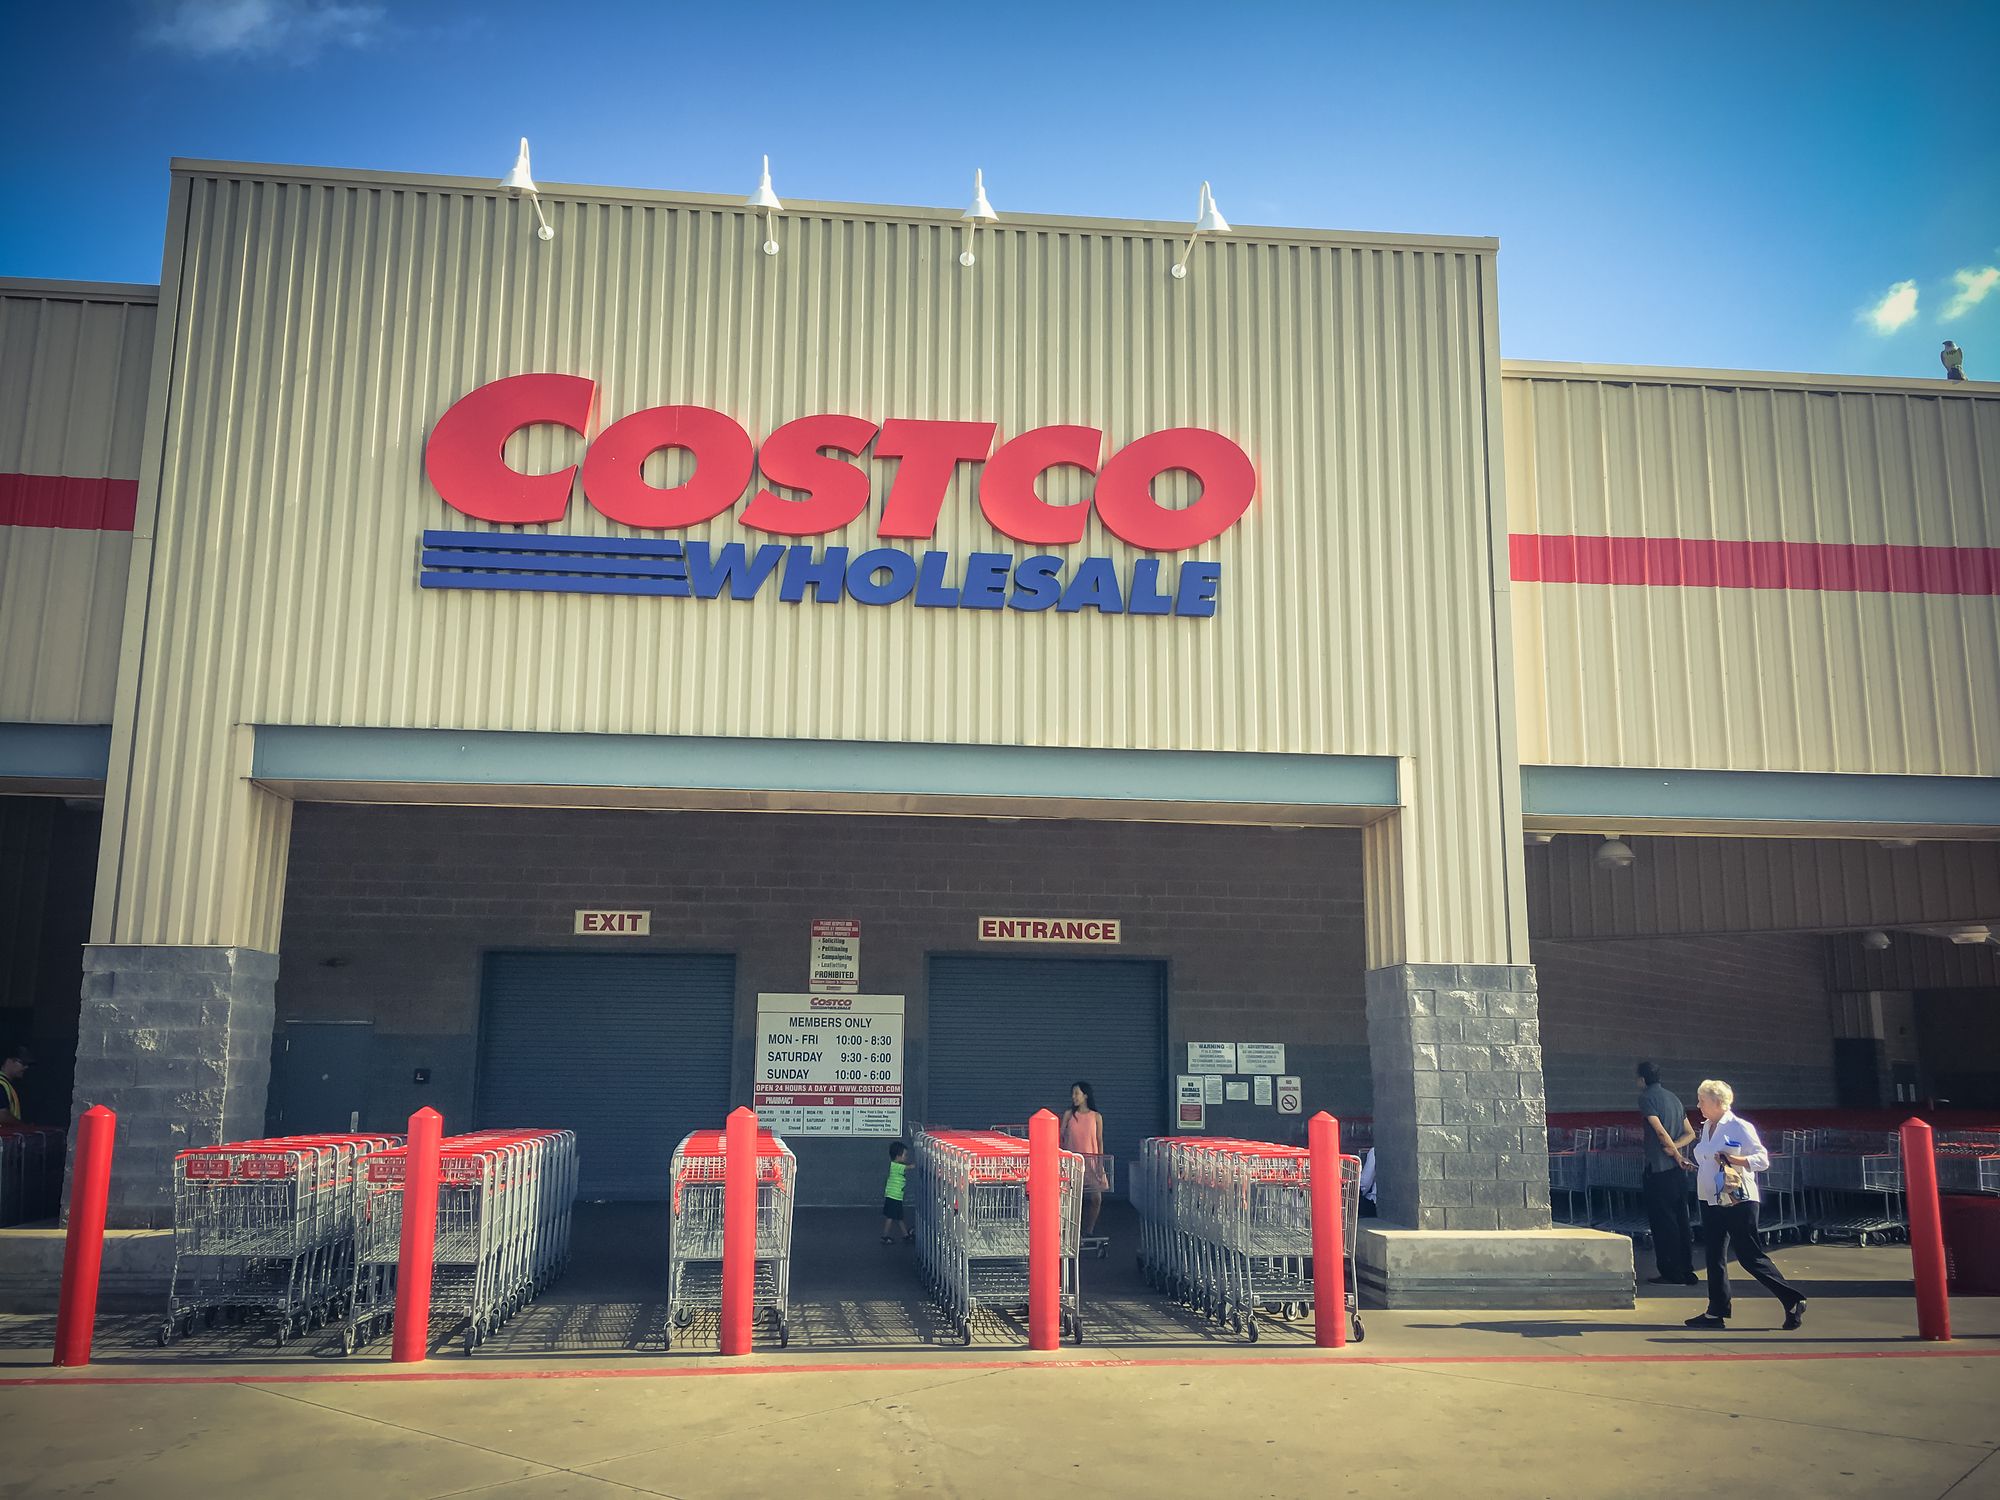 Procter & Gamble Class Action Says Costco Rebates Aren't Delivered